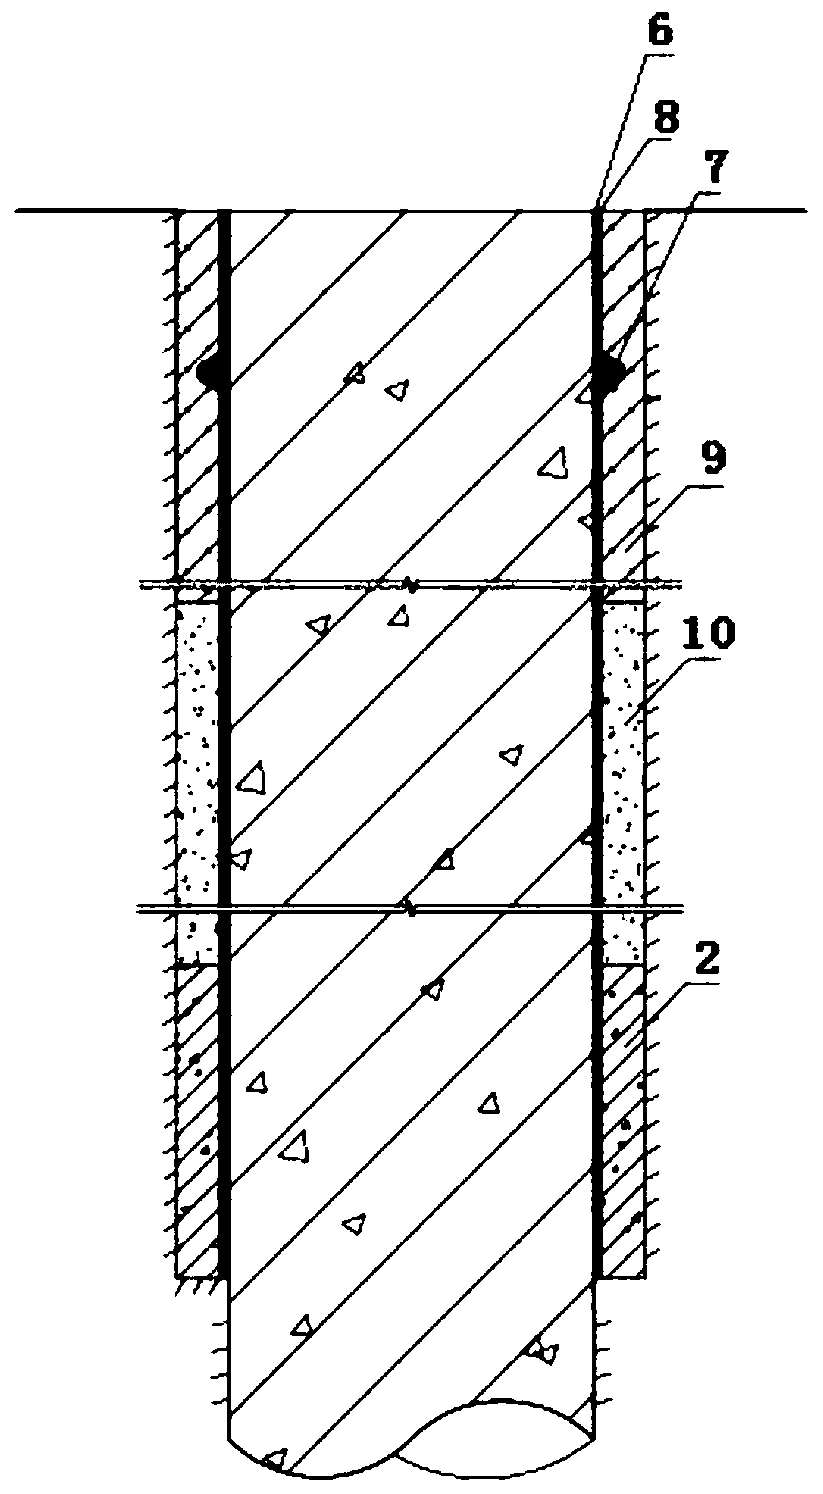 Method for reducing side friction of pile foundation